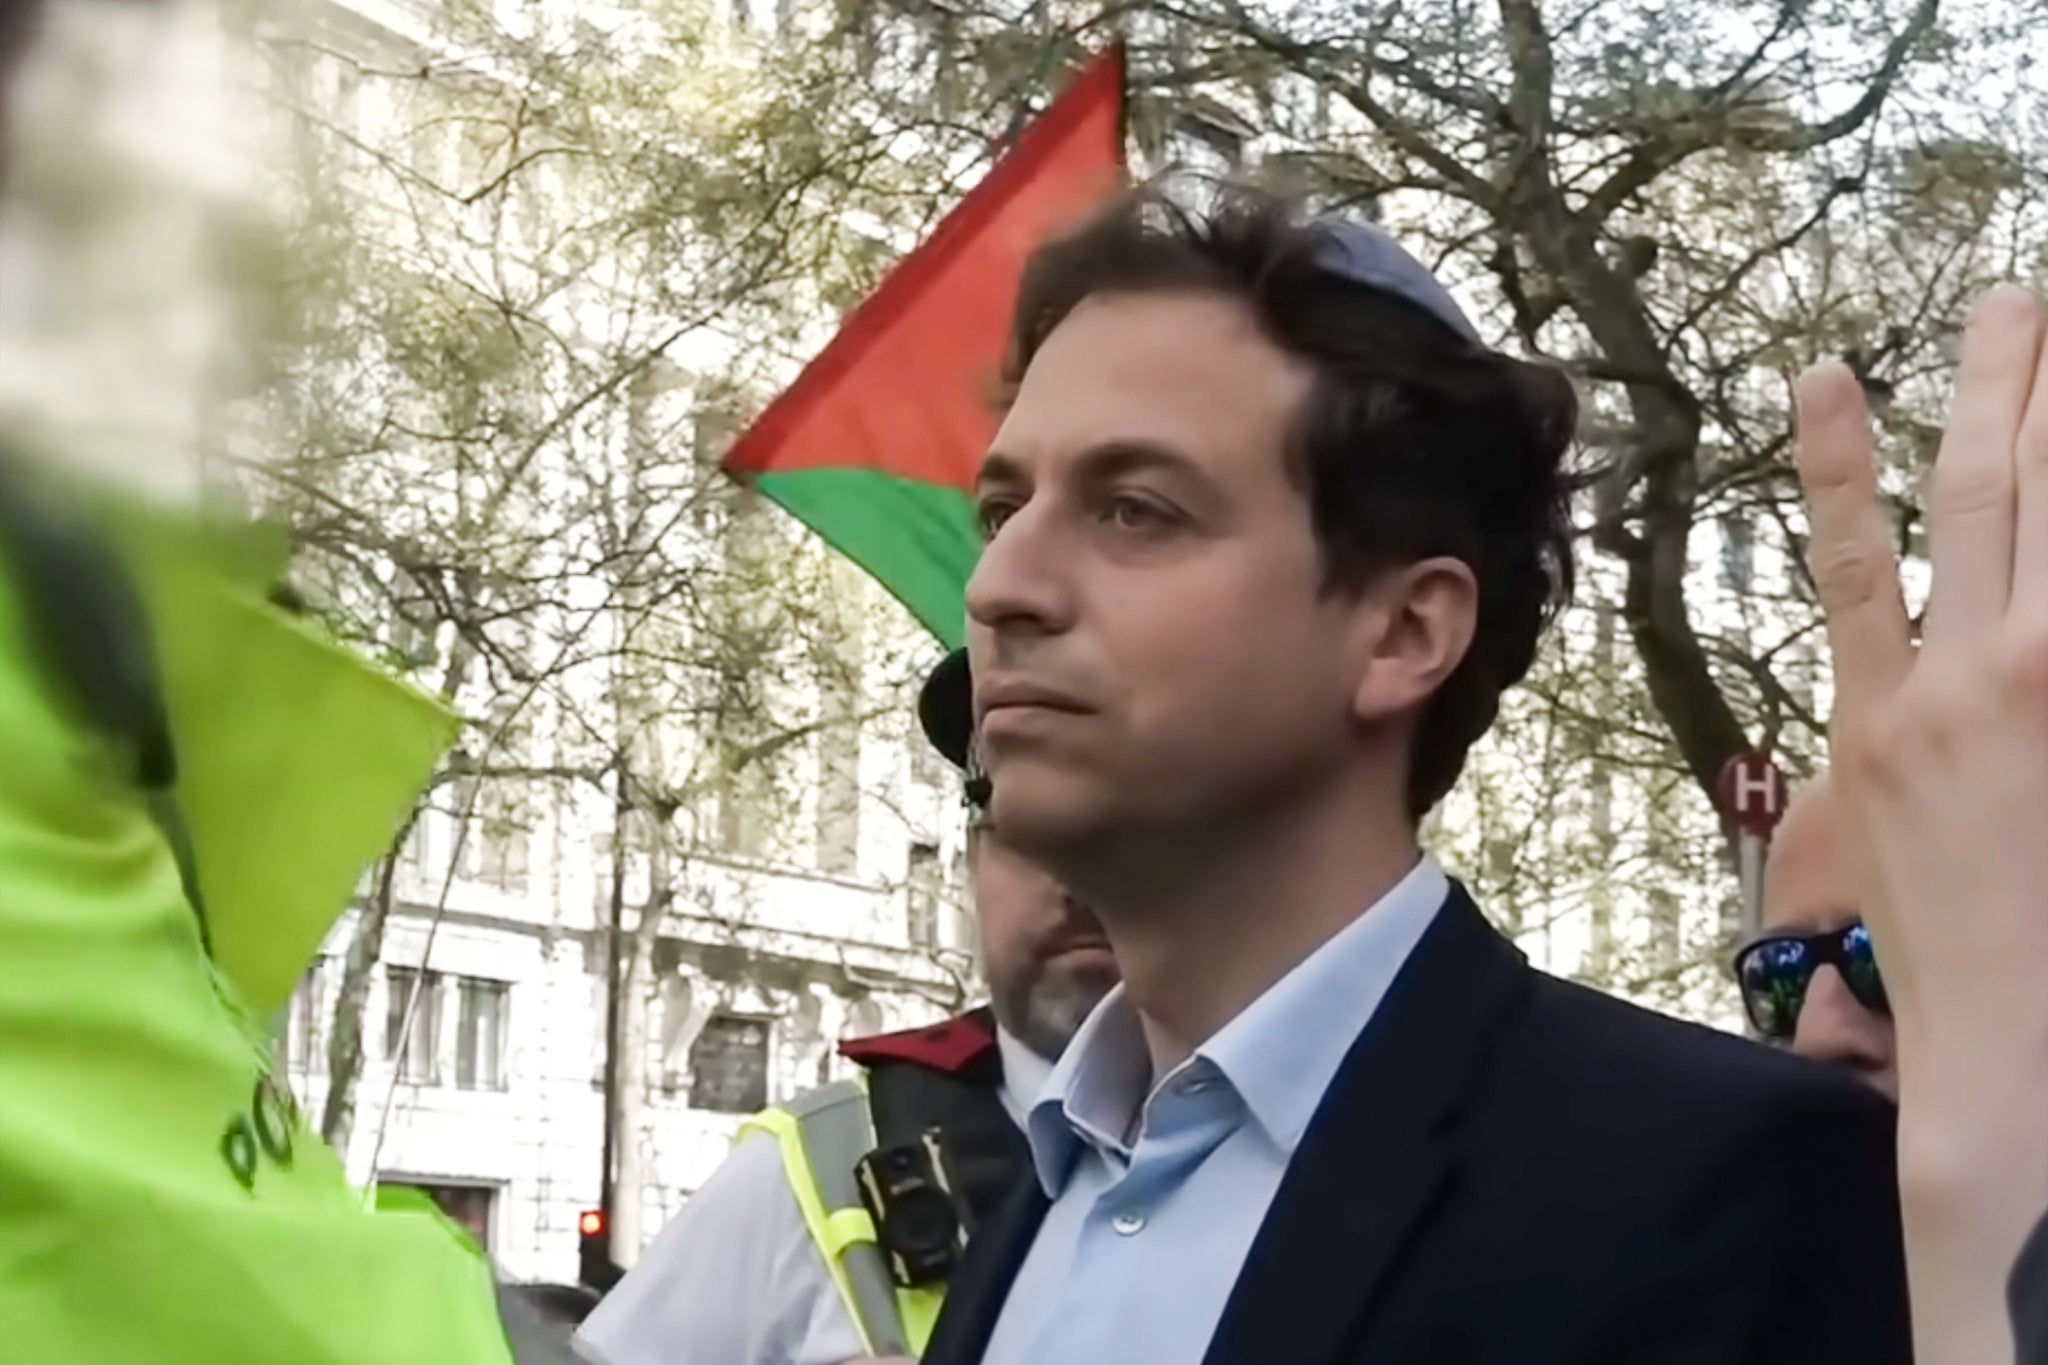 Gideon Falter is the chief executive of the Campaign Against Antisemitism